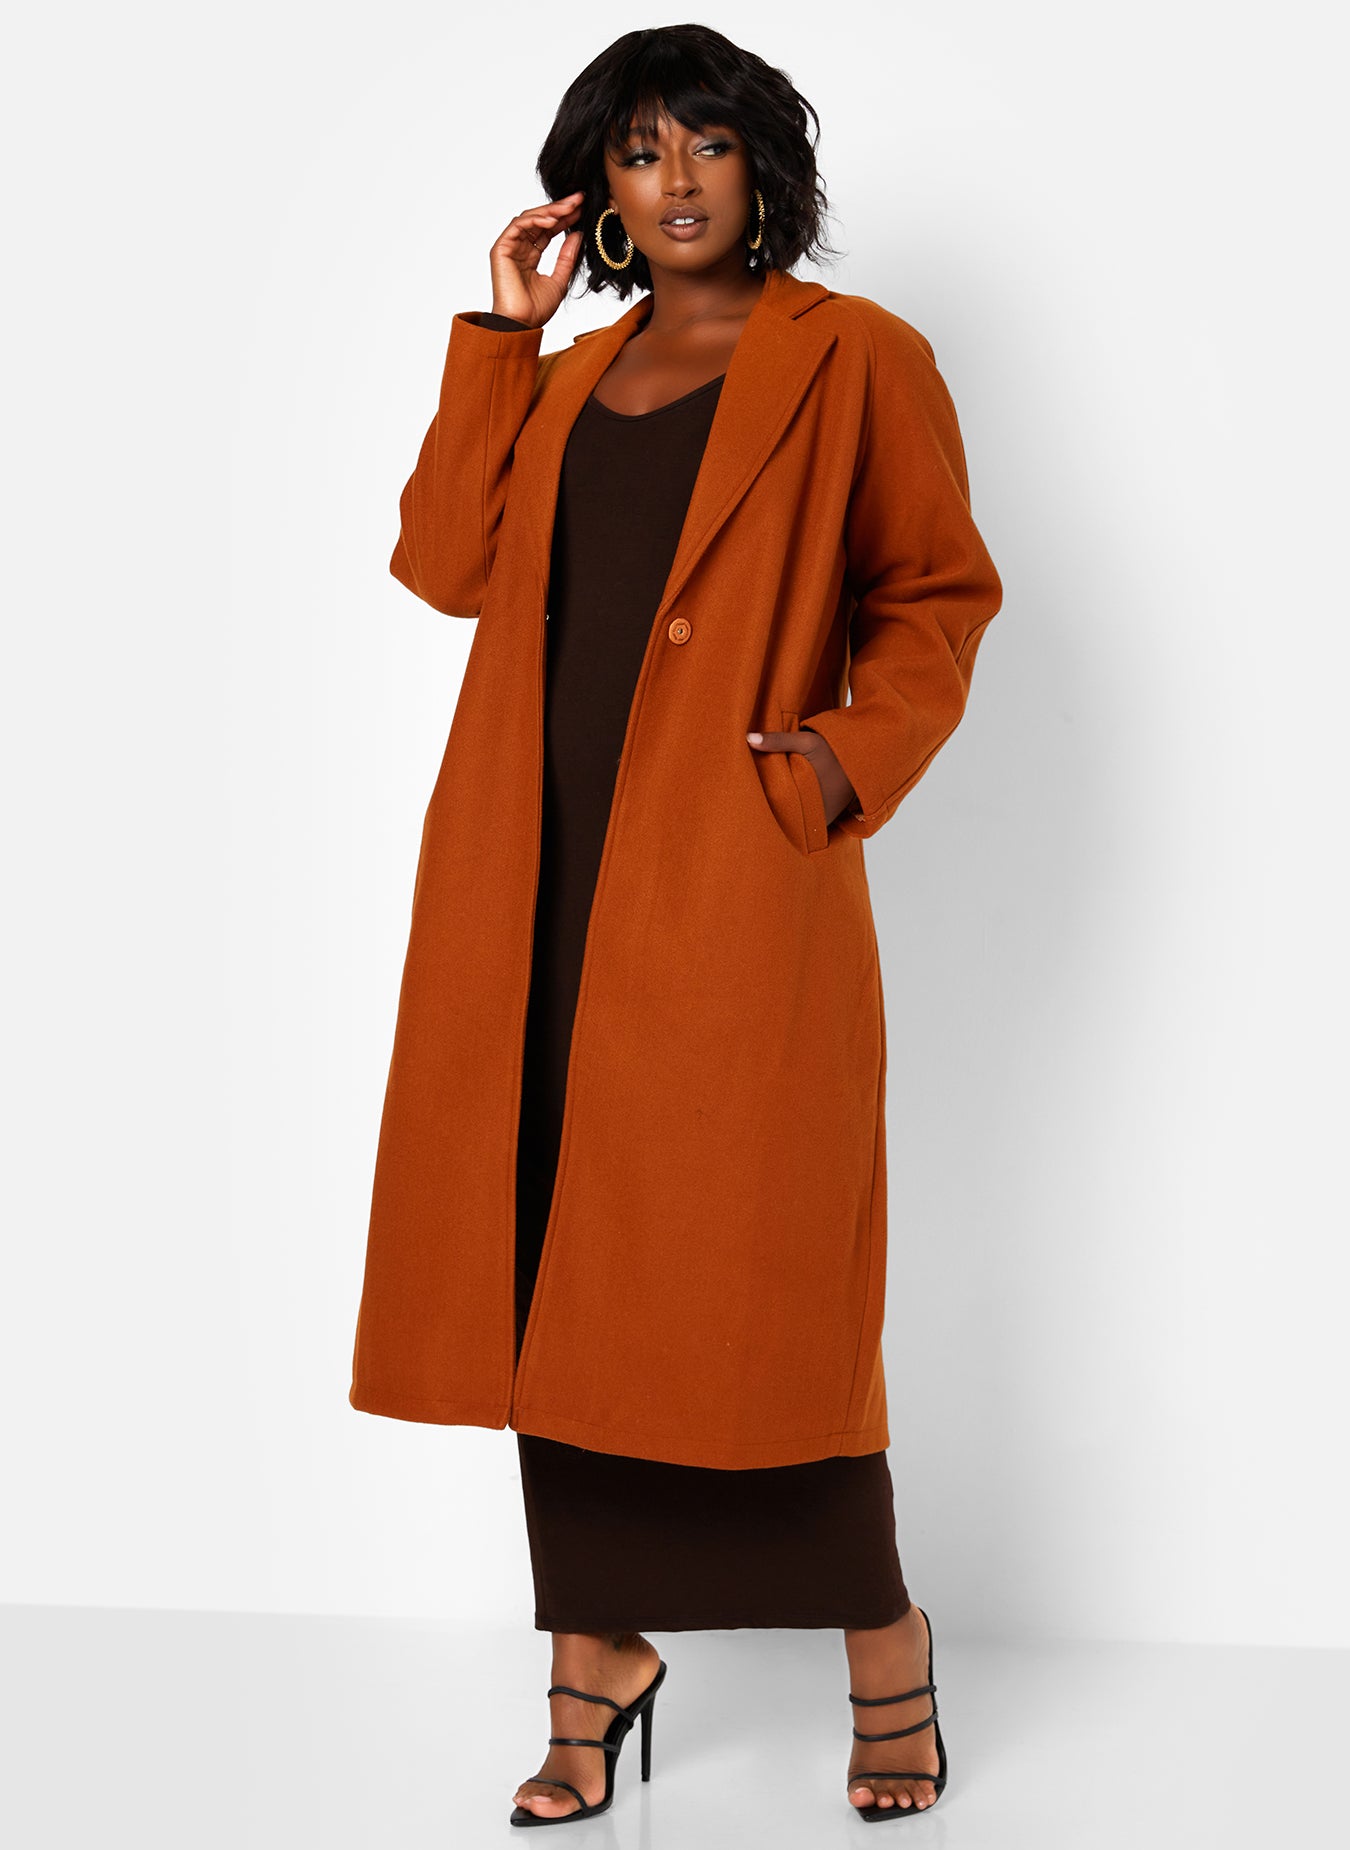 Brown First Class Collared Single Snap Closure Coat W. Pockets Plus Sizes